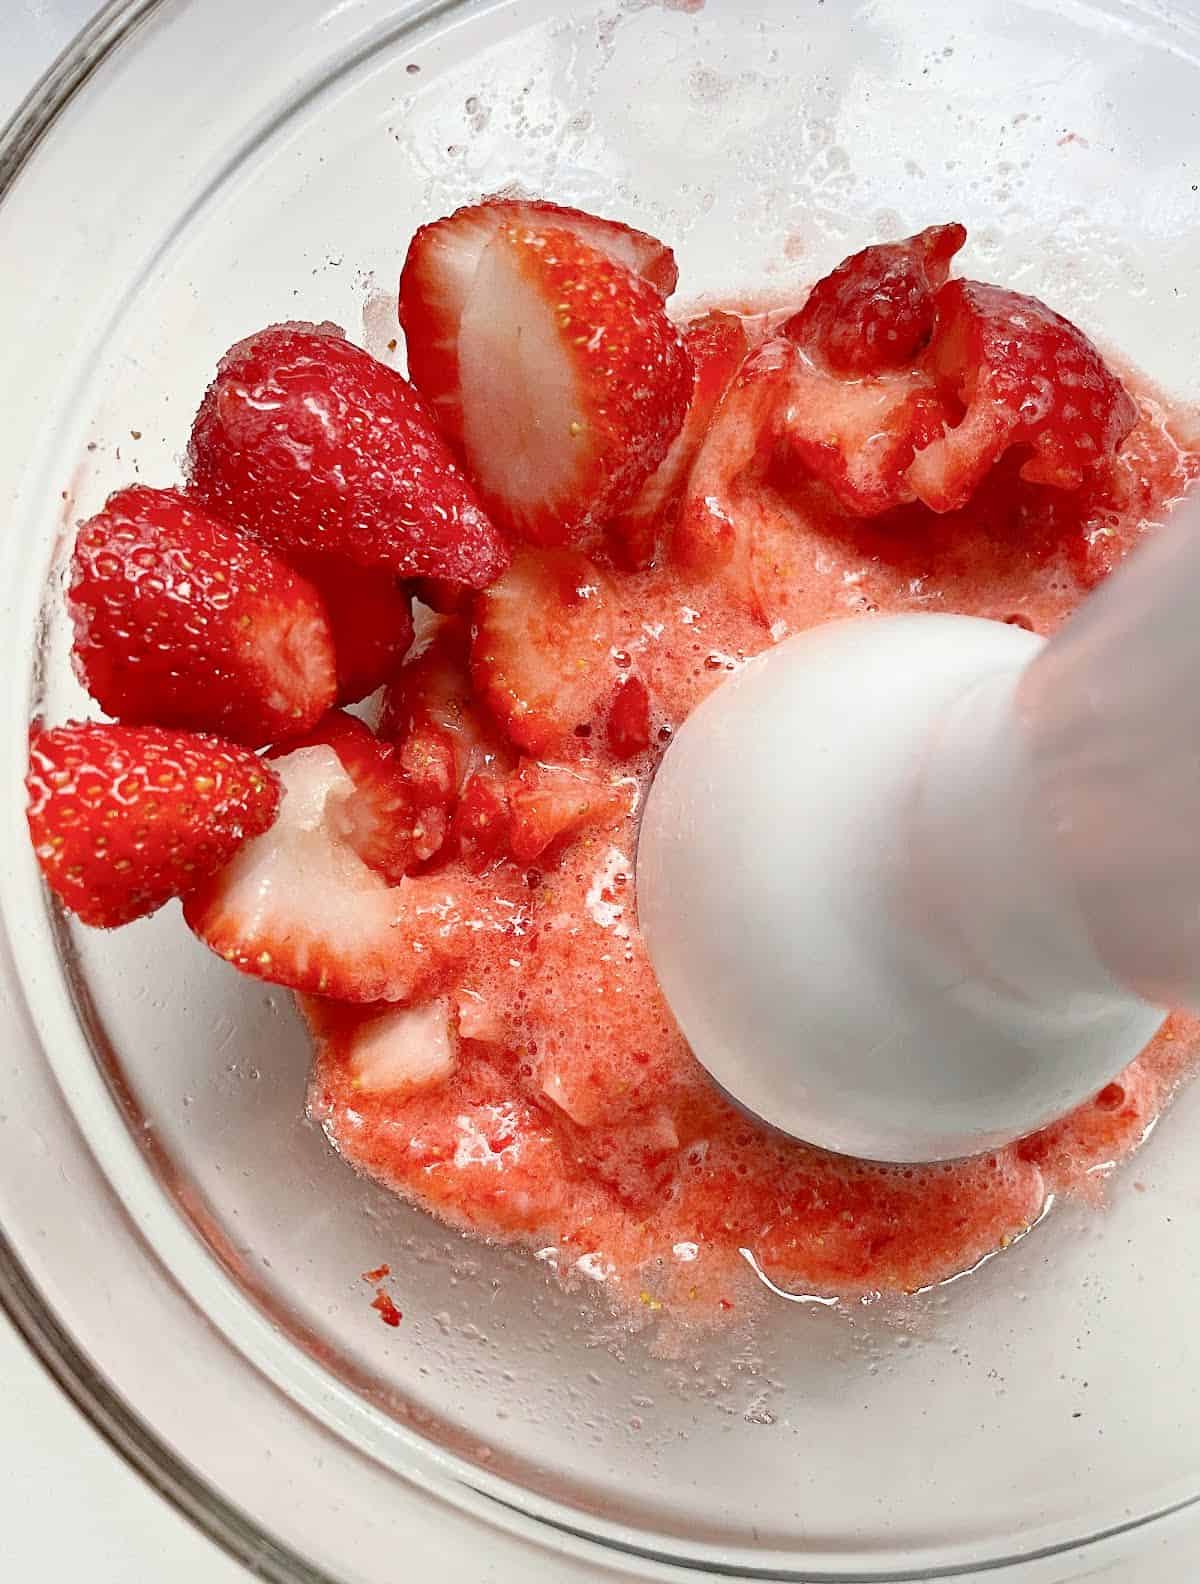 Immersion blender mixing semi whole strawberries with sugar in glass bowl.